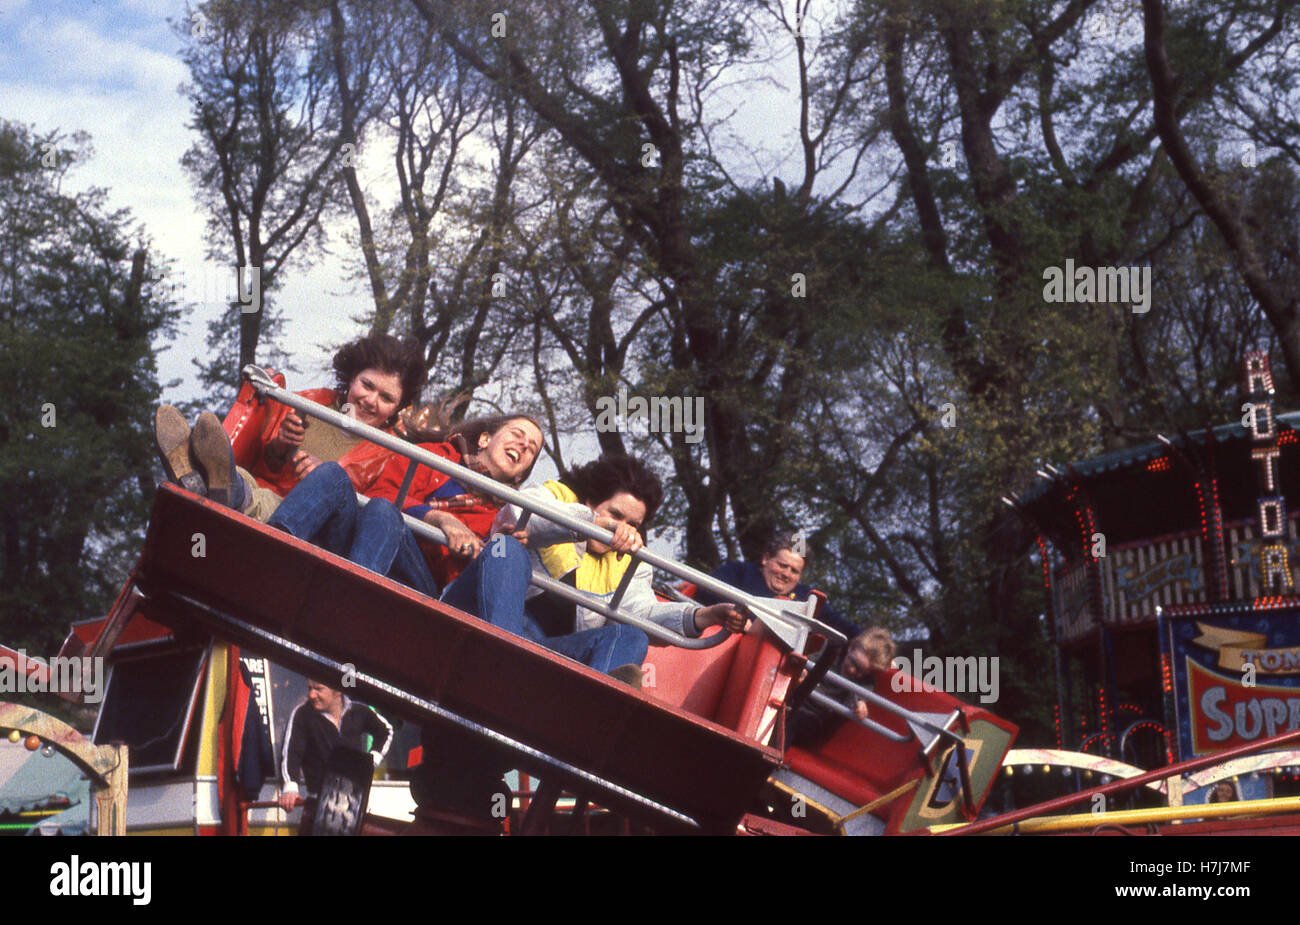 England, 1960s, children riding on an amusement ride, a twist where the passengers sit in small carriages experience centrifugal force. Stock Photo